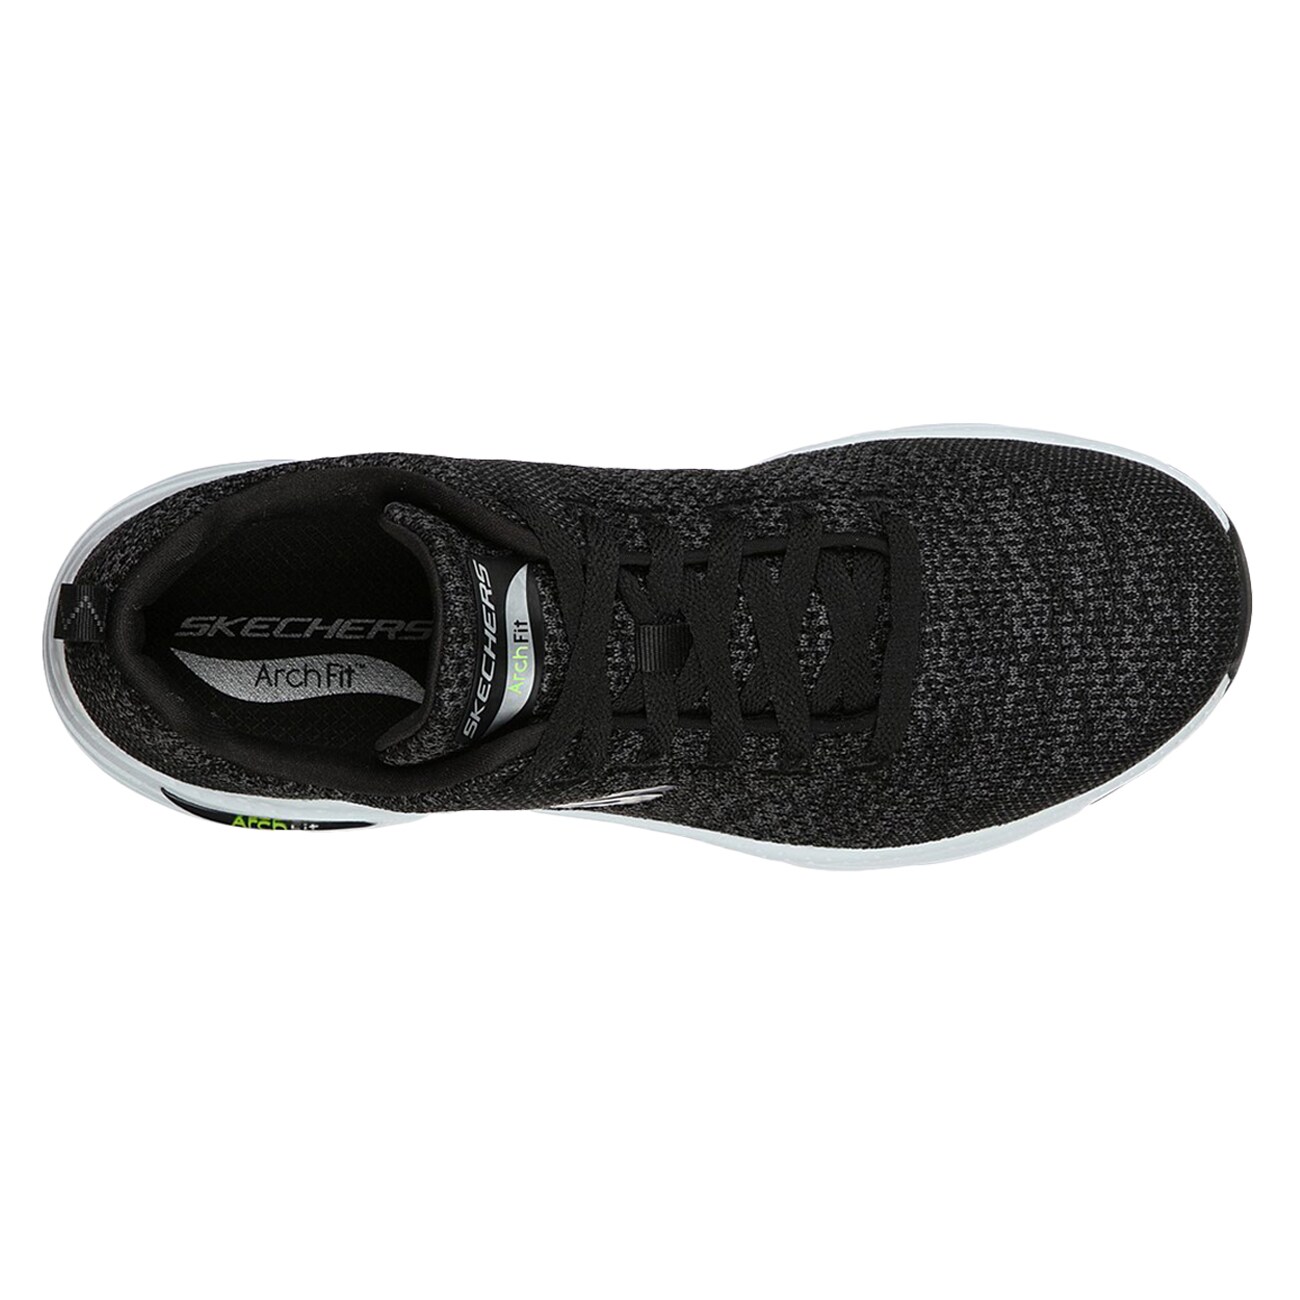 Skechers Men's Arch Fit Paradyme Running Shoe | The Shoe Company